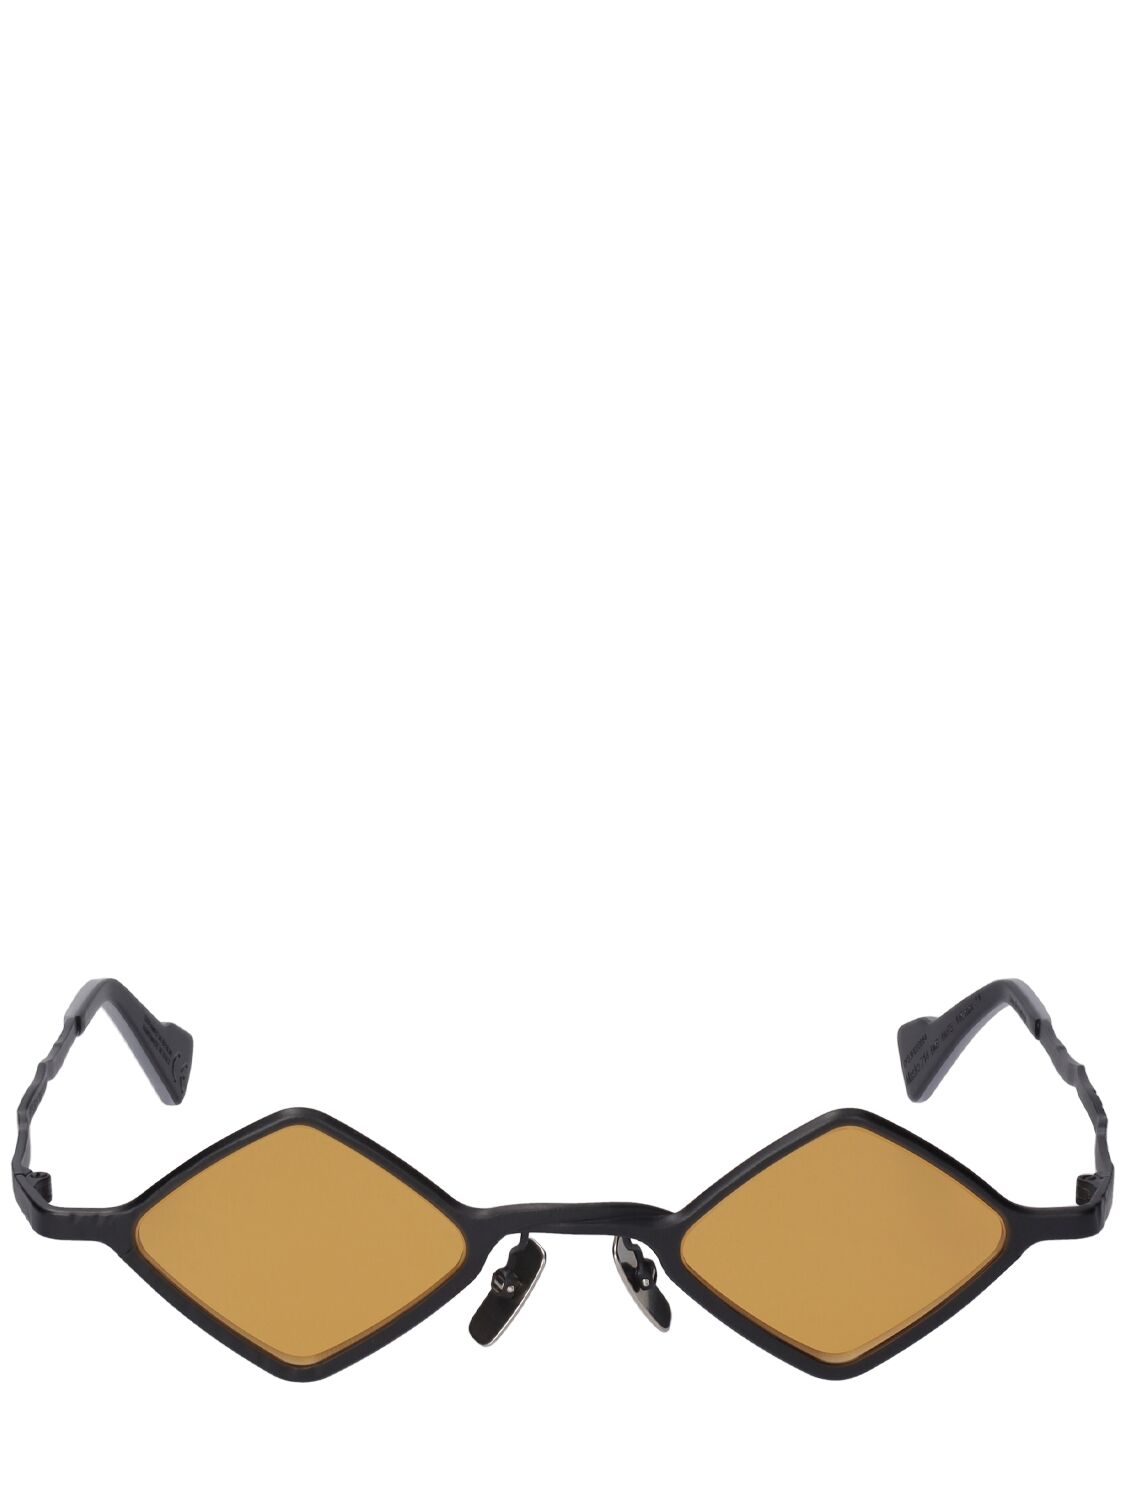 Image of Z14 Squared Metal Sunglasses